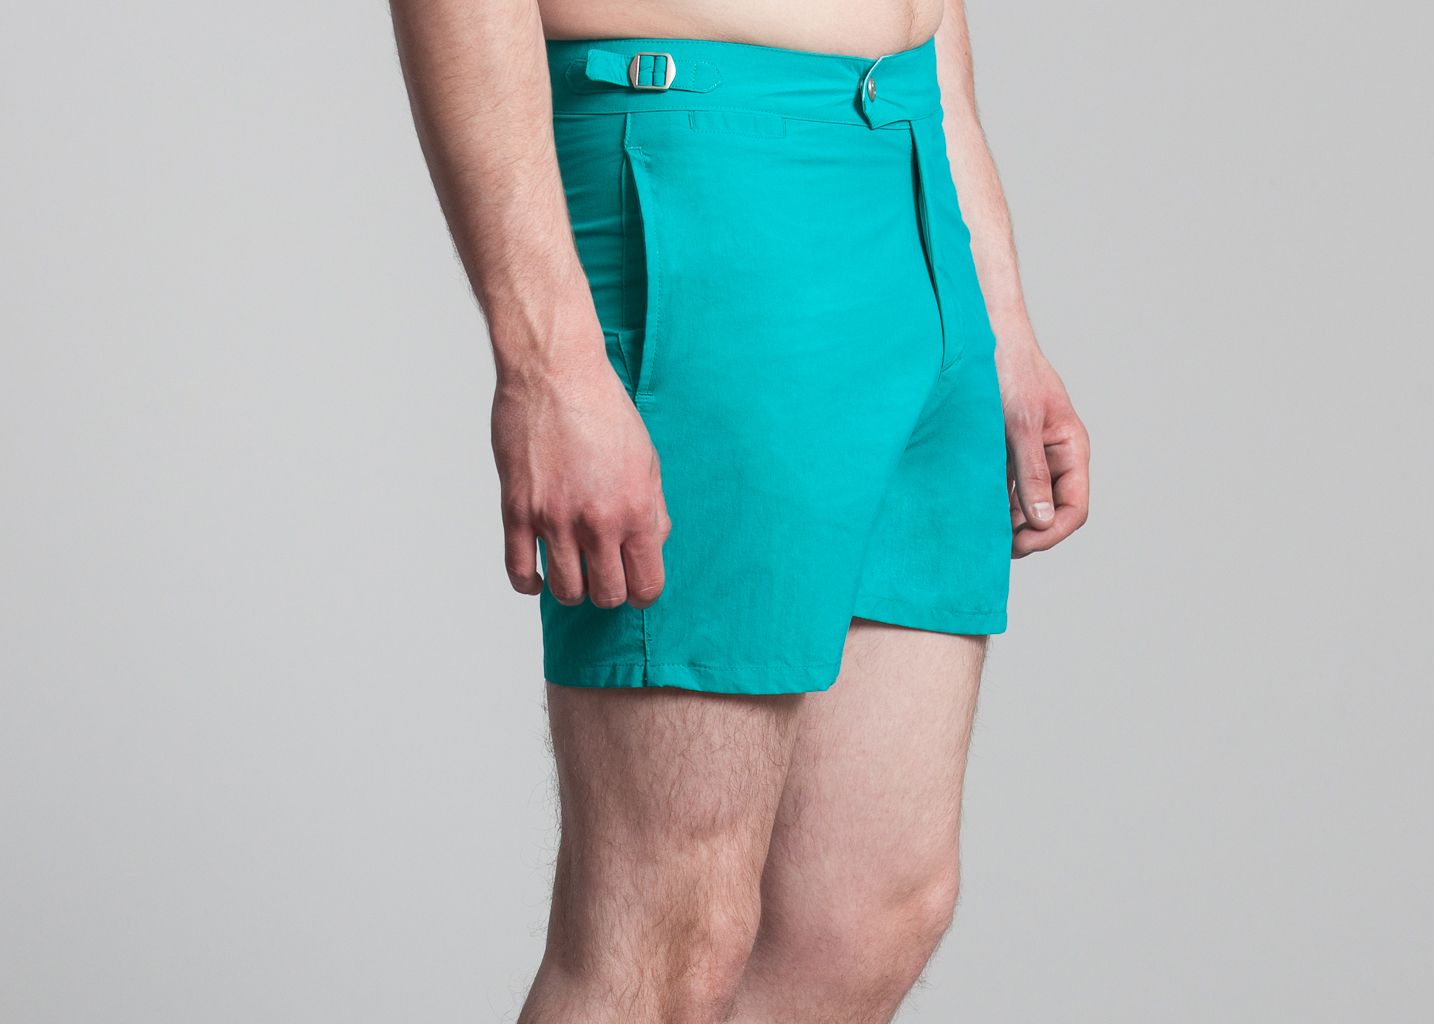 Solid Color Swimshorts - Swim-ology